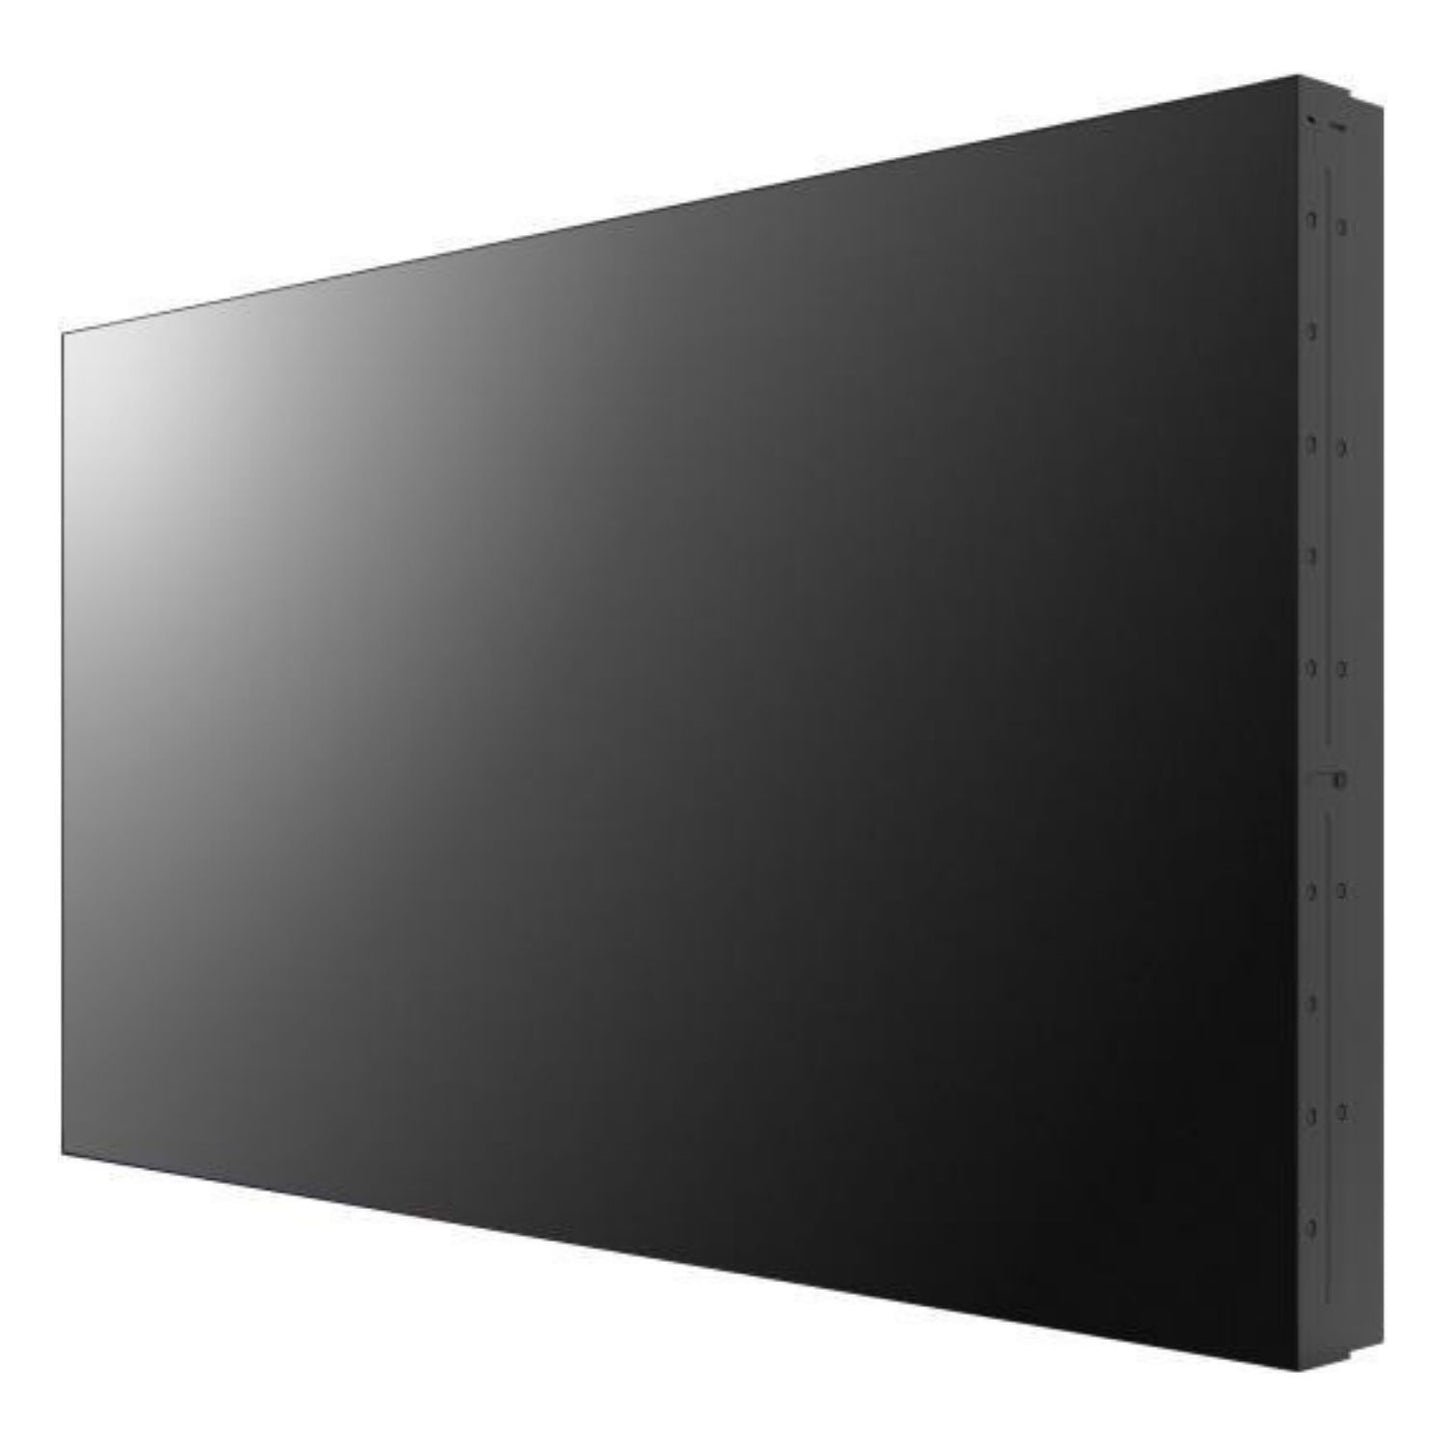 DS-D2055HE-G - 55-inch 1.8mm LCD Display Unit